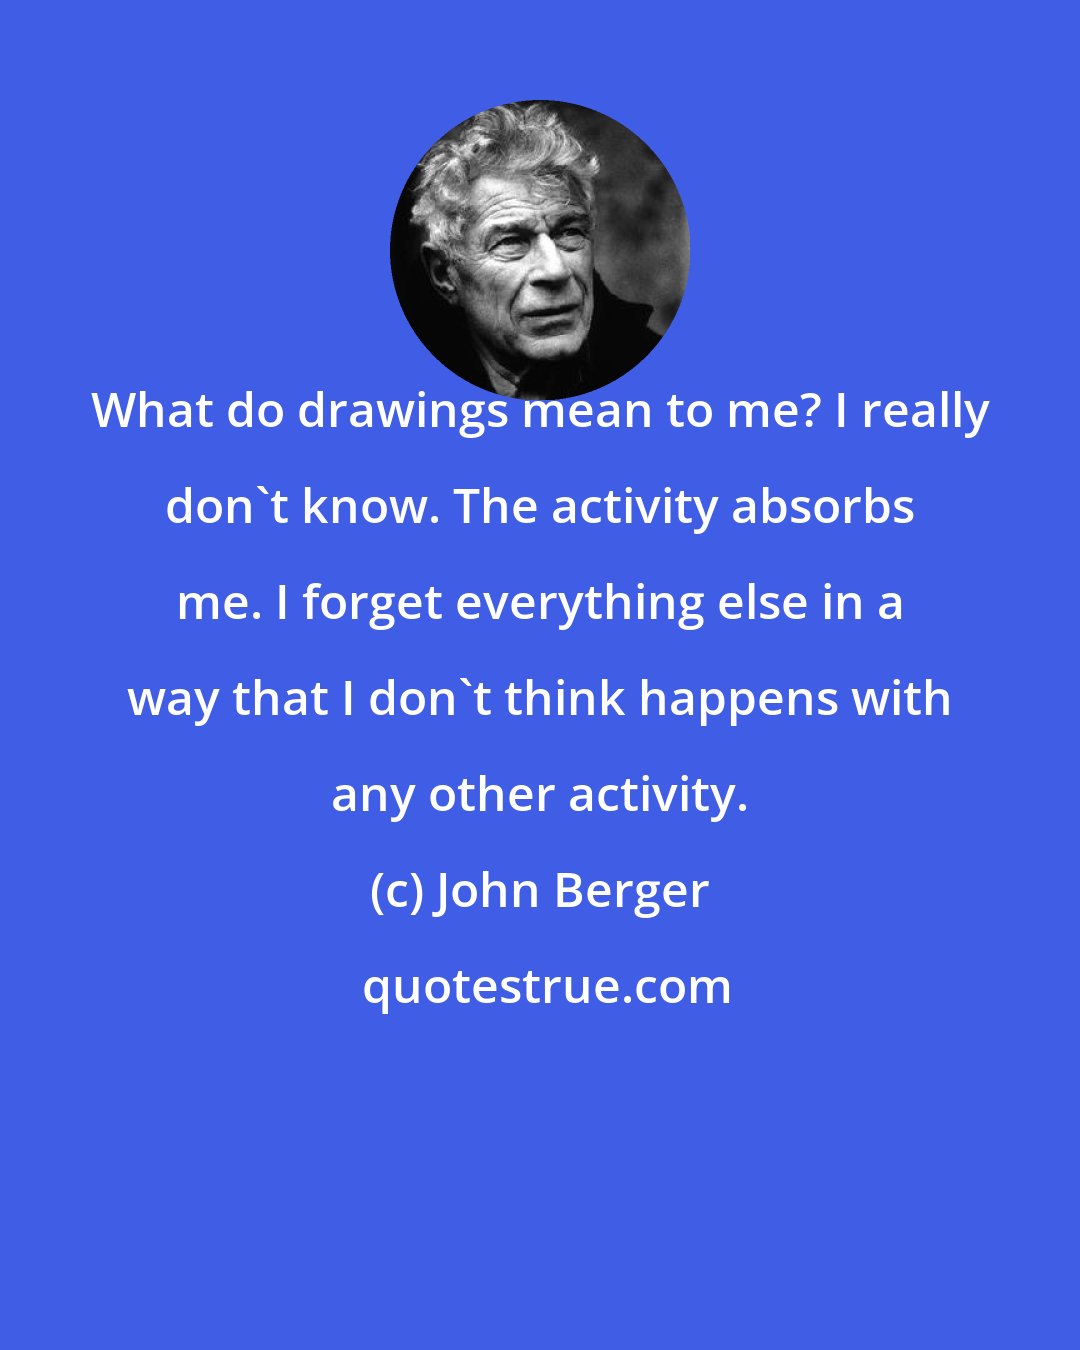 John Berger: What do drawings mean to me? I really don't know. The activity absorbs me. I forget everything else in a way that I don't think happens with any other activity.